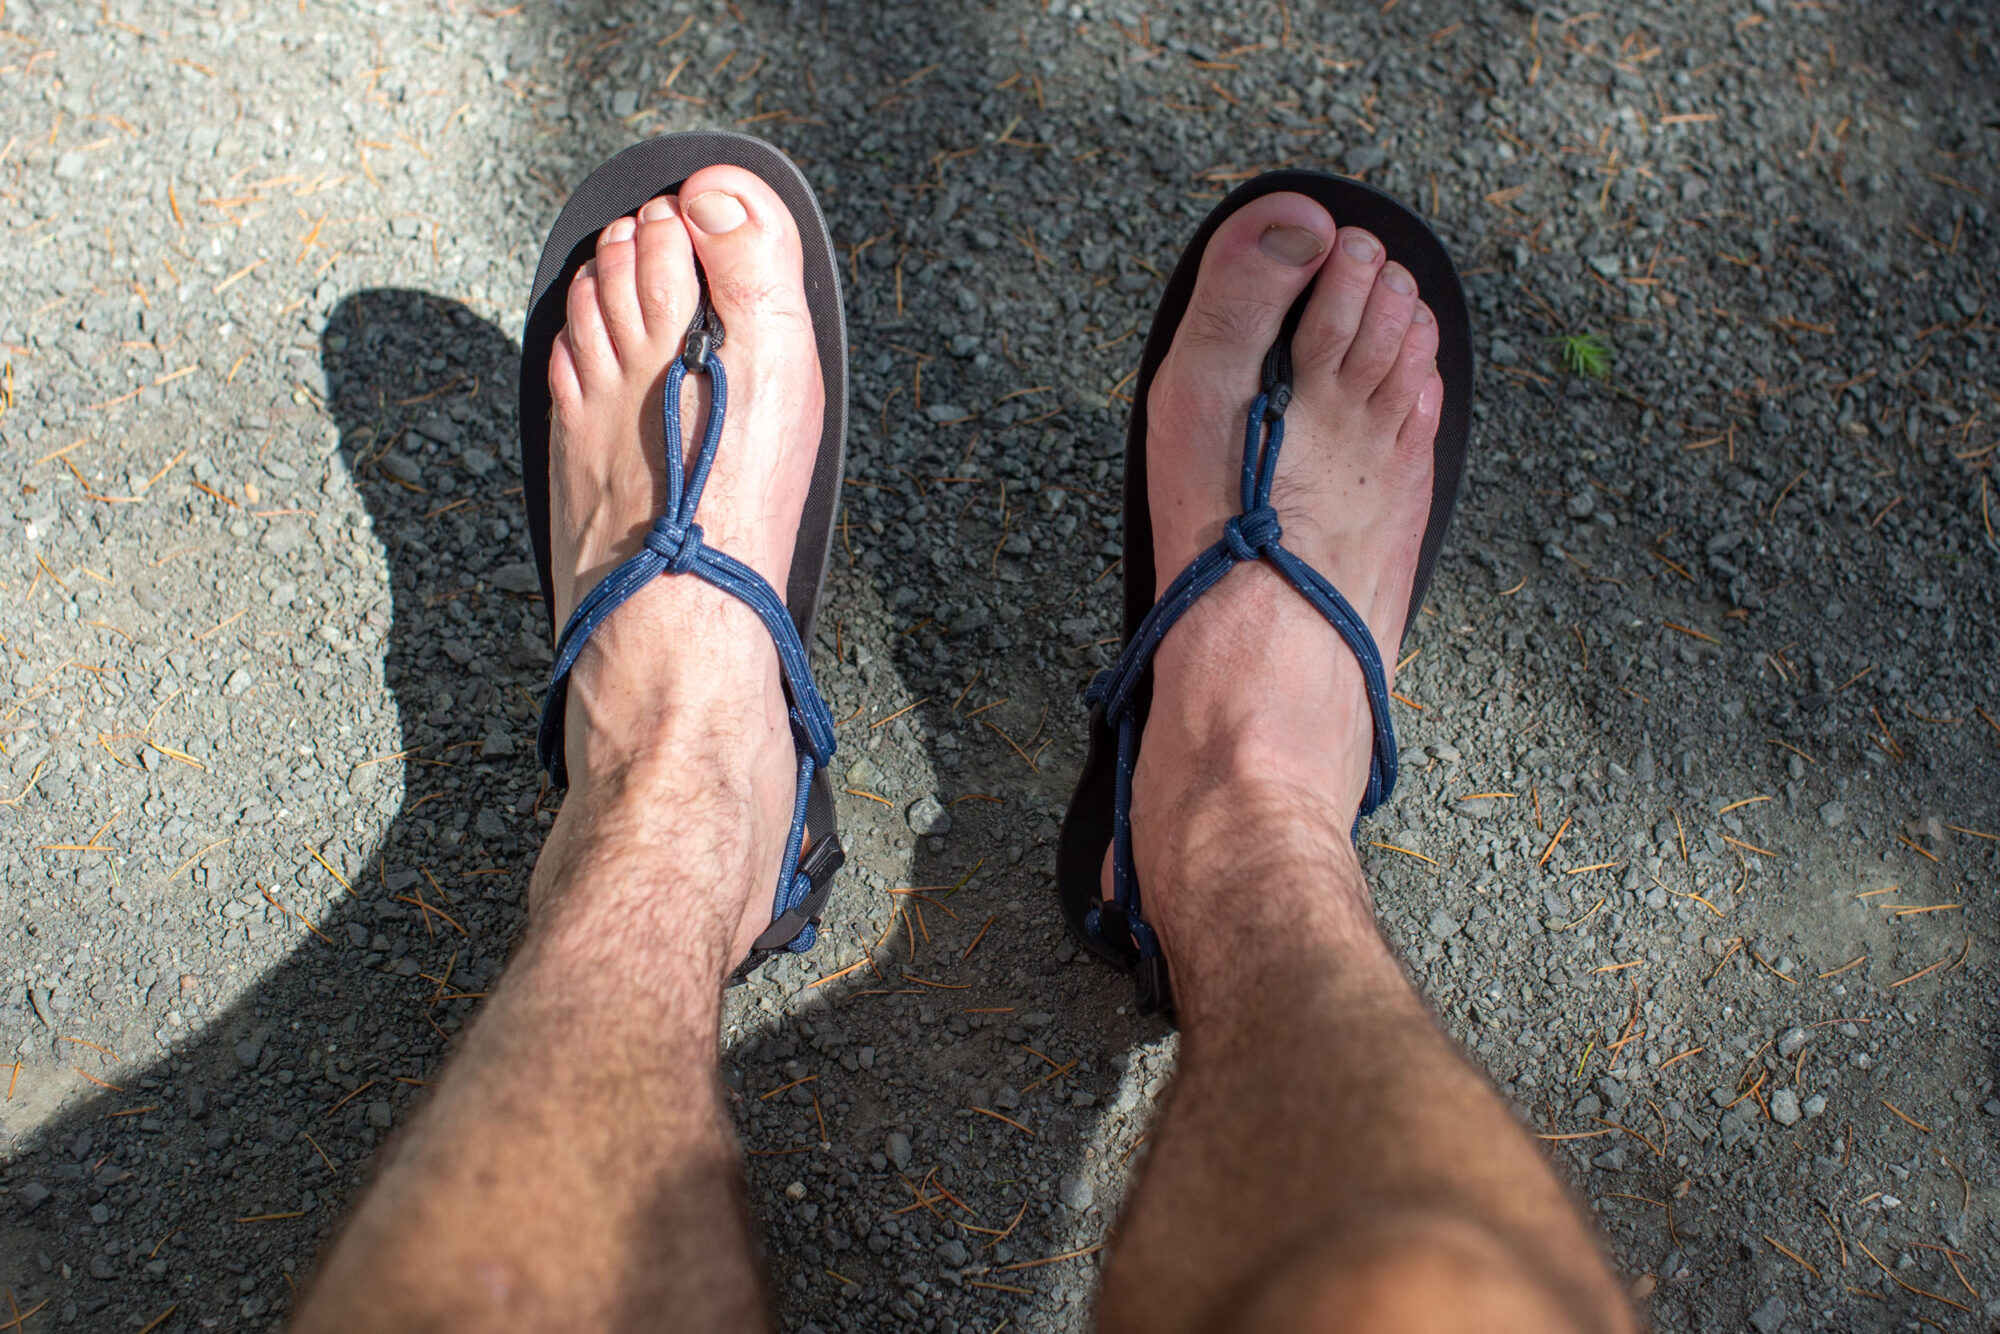 Xero genesis camp sandals review, ultralight camp shoes